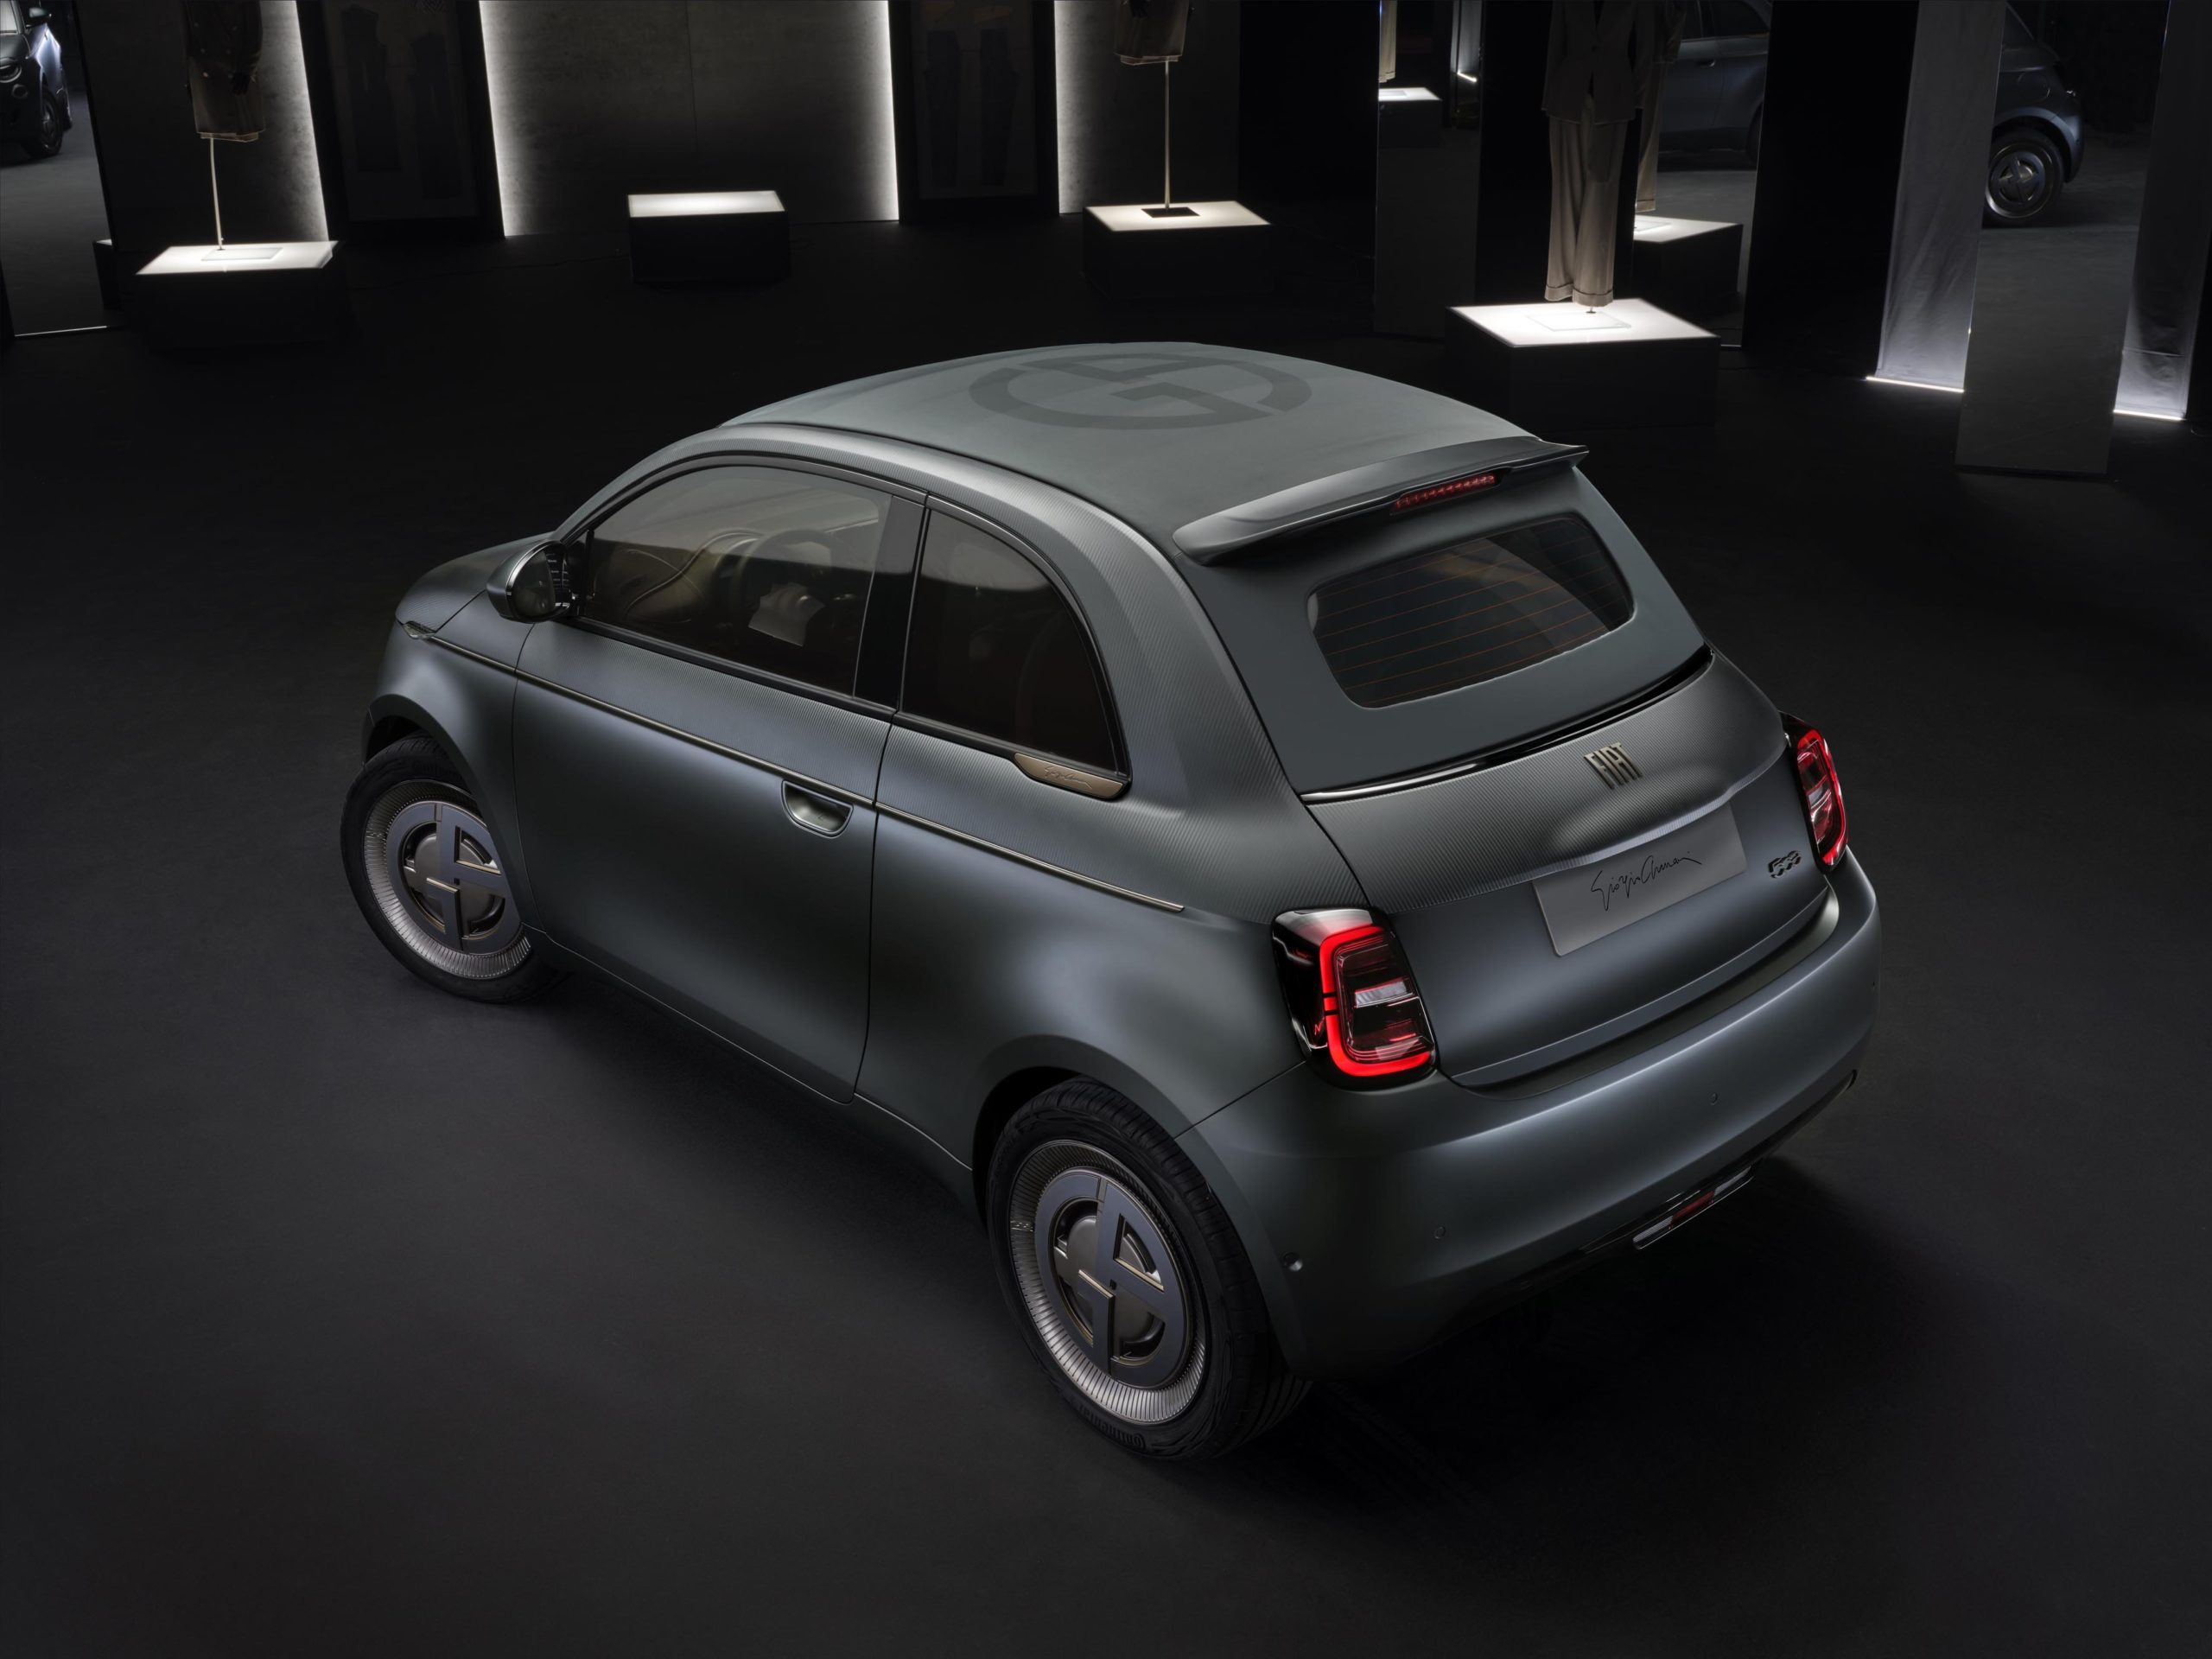 Introducing the sustainable Fiat 500 model, exclusively designed by Giorgio Armani